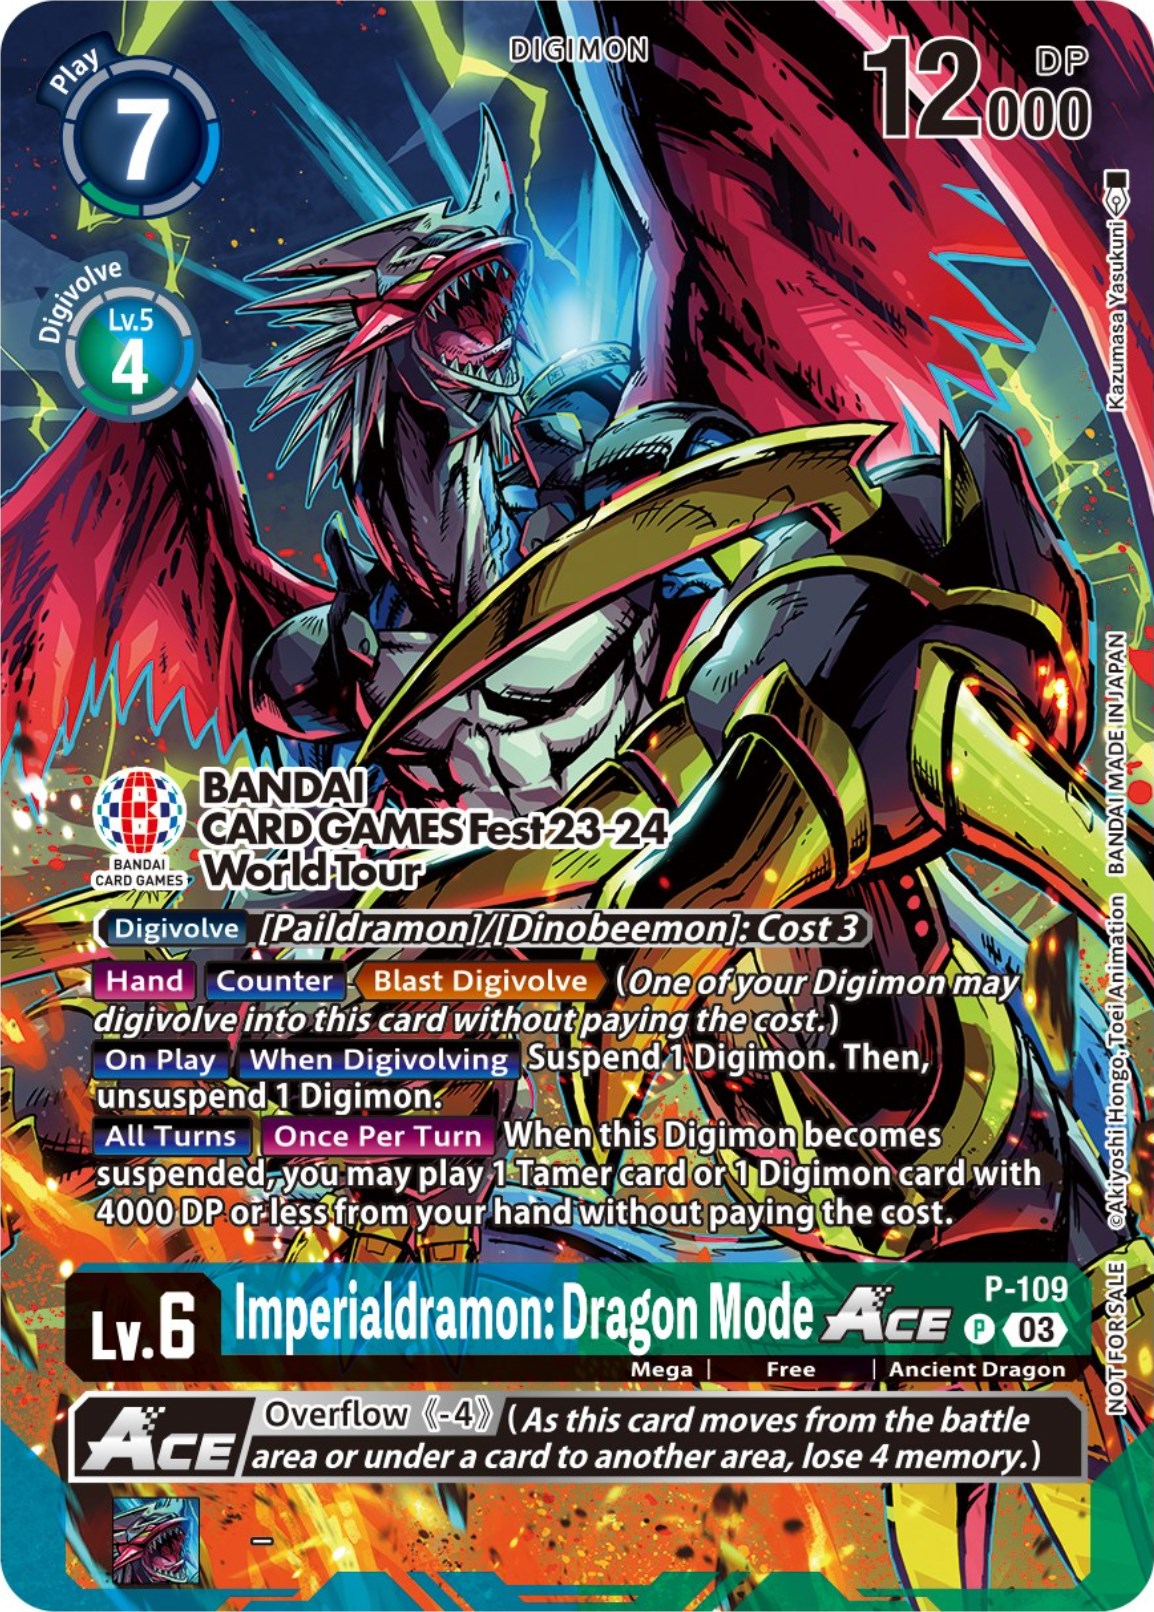 Imperialdramon: Dragon Mode Ace [P-109] (BANDAI Card Games Fest 23-24 World Tour) [Promotional Cards] | Viridian Forest